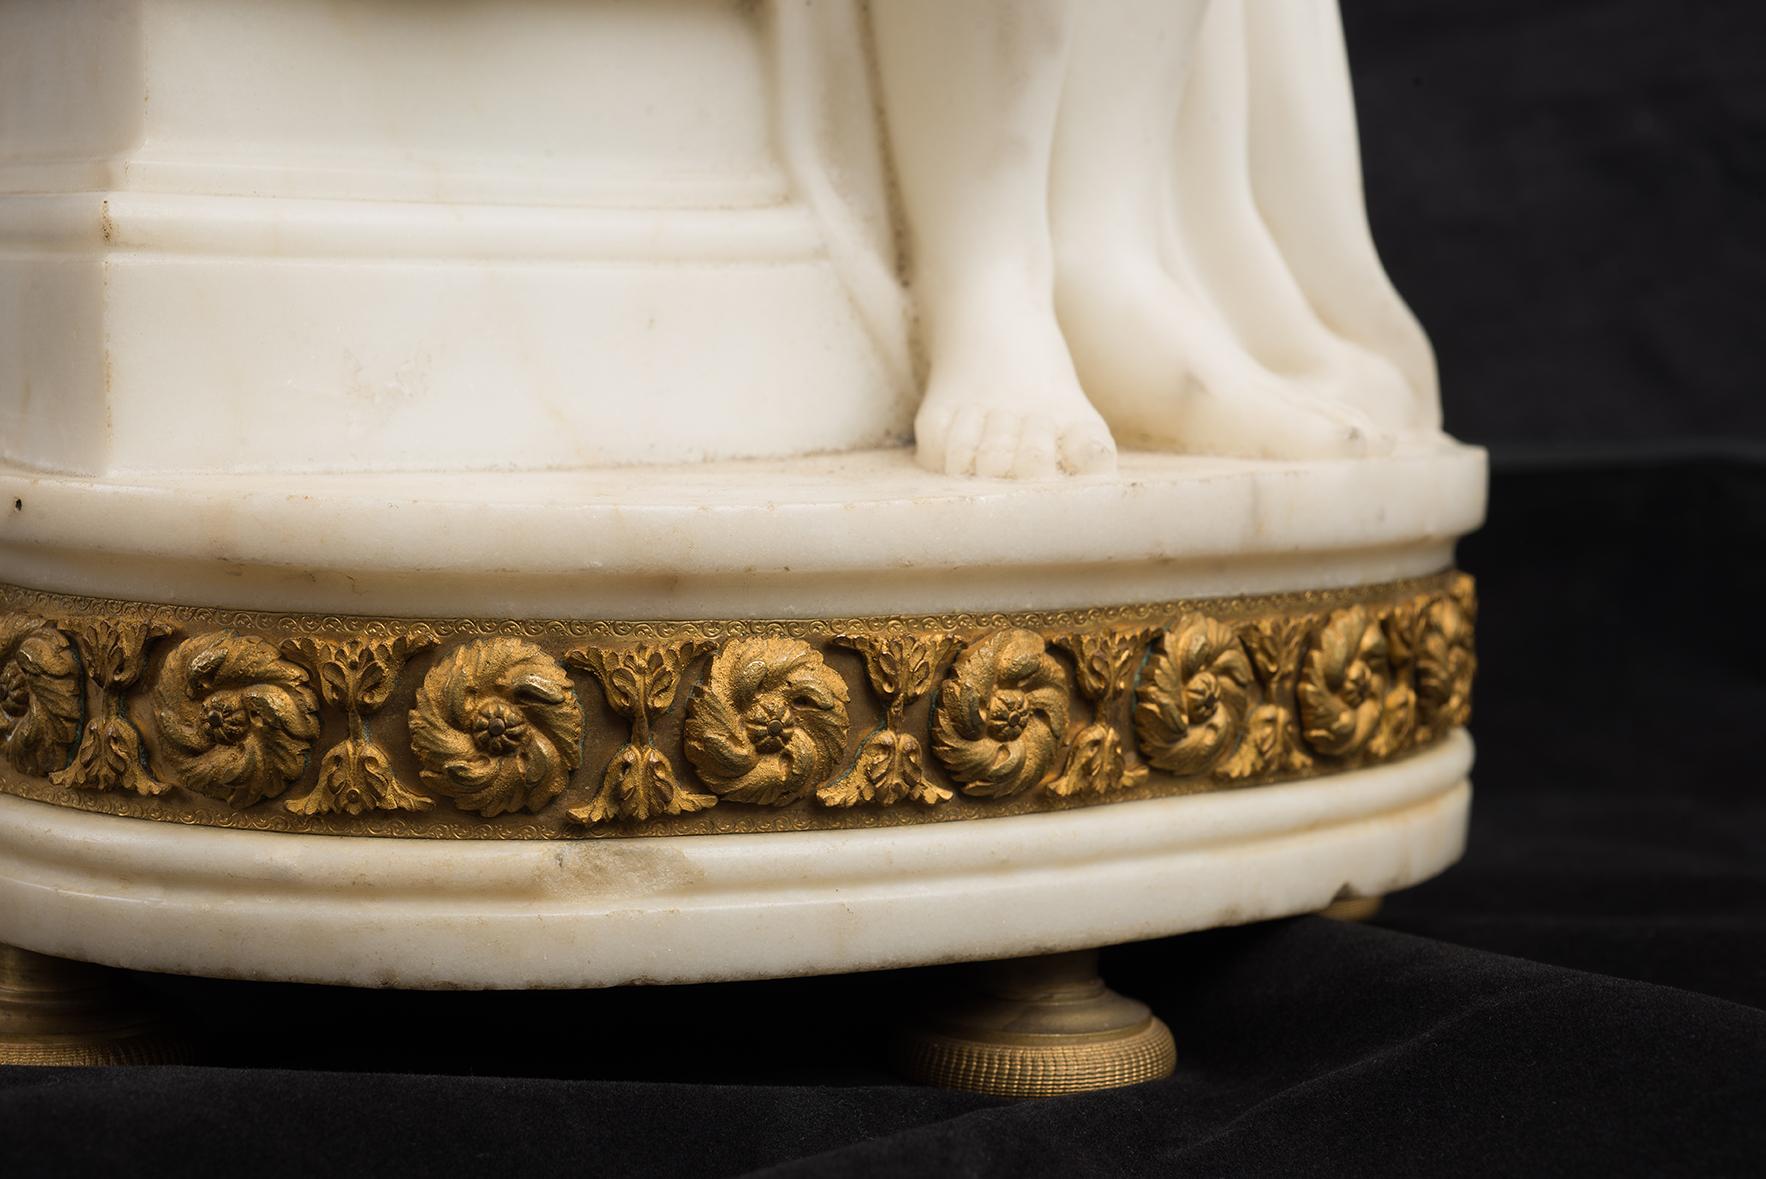 Antique white marble statuary clock belonging to the Napoleon III period of the second half of the 19th century.

A woman holding a book rests on a column with a porcelain dial in the center.

The base wrapped in a gilded bronze garniture rests on